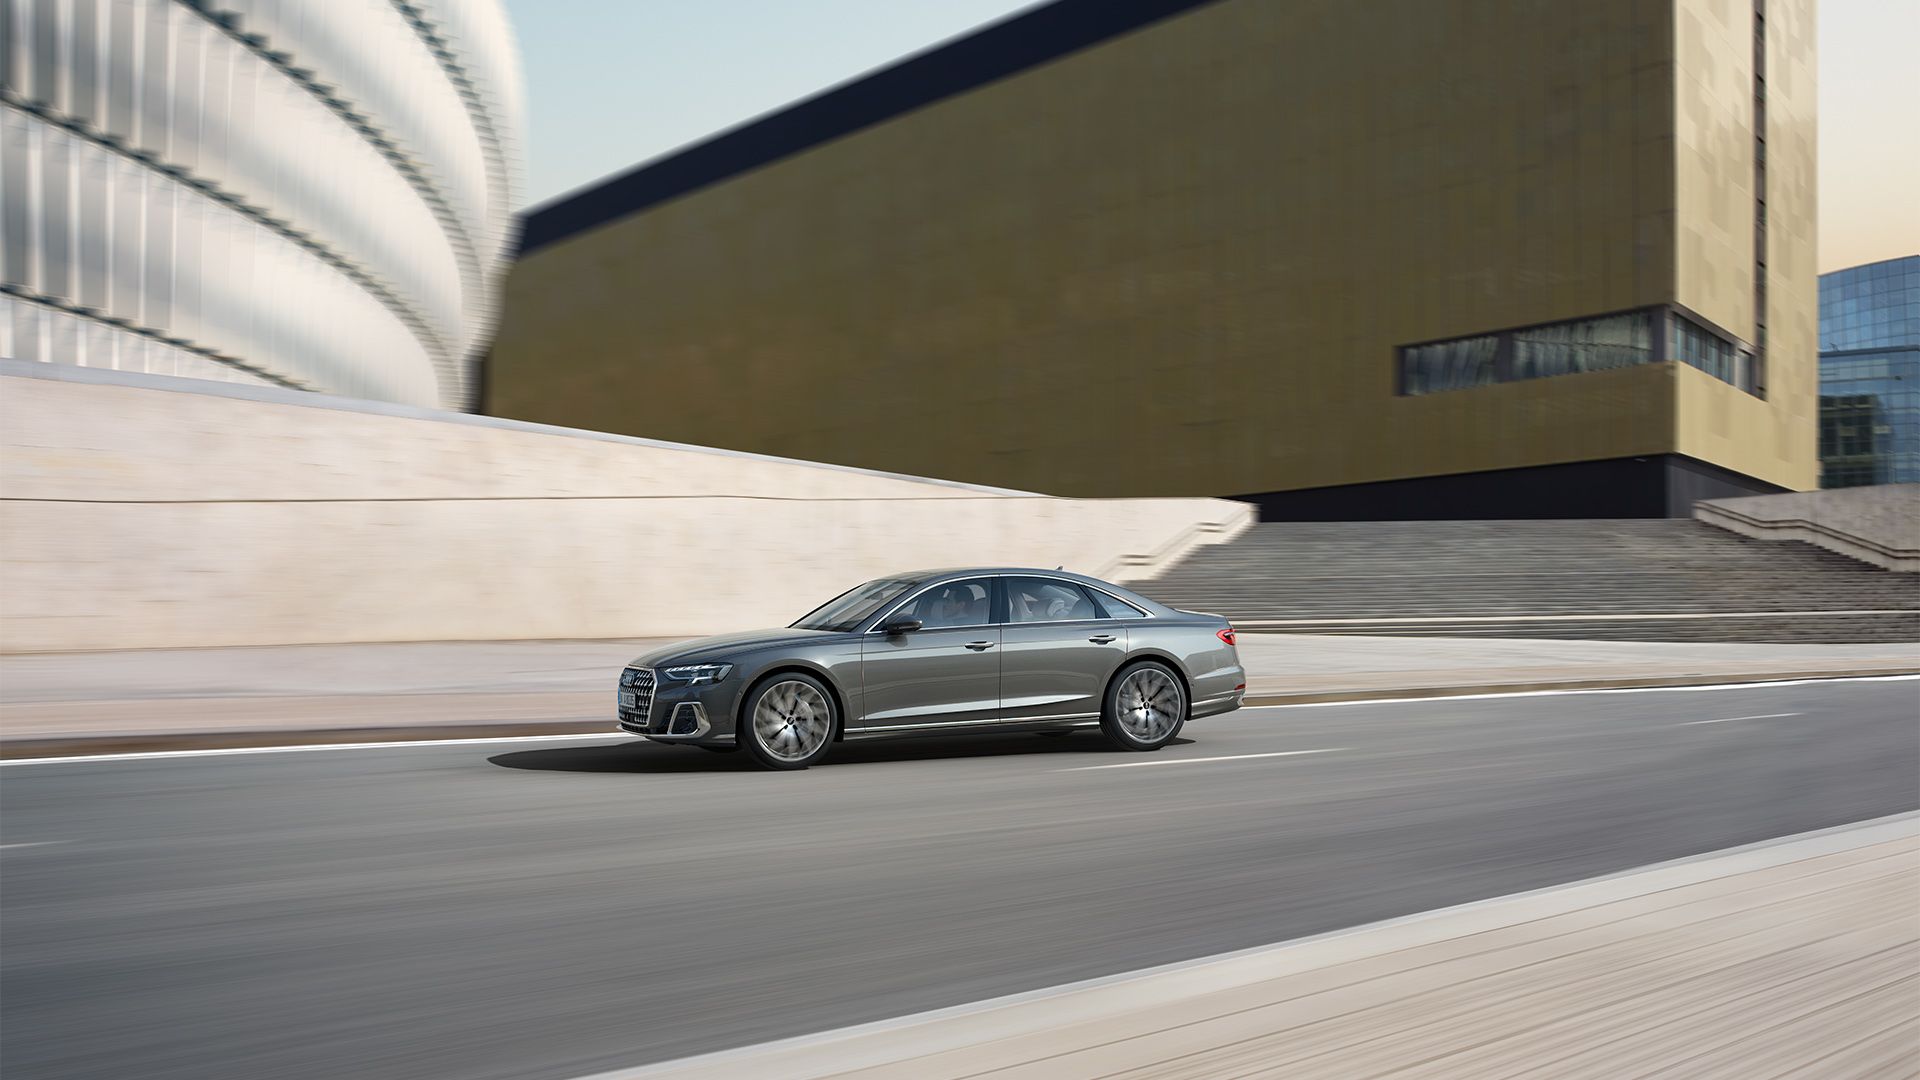 An Audi A8 sedan seen from the side as it drives.